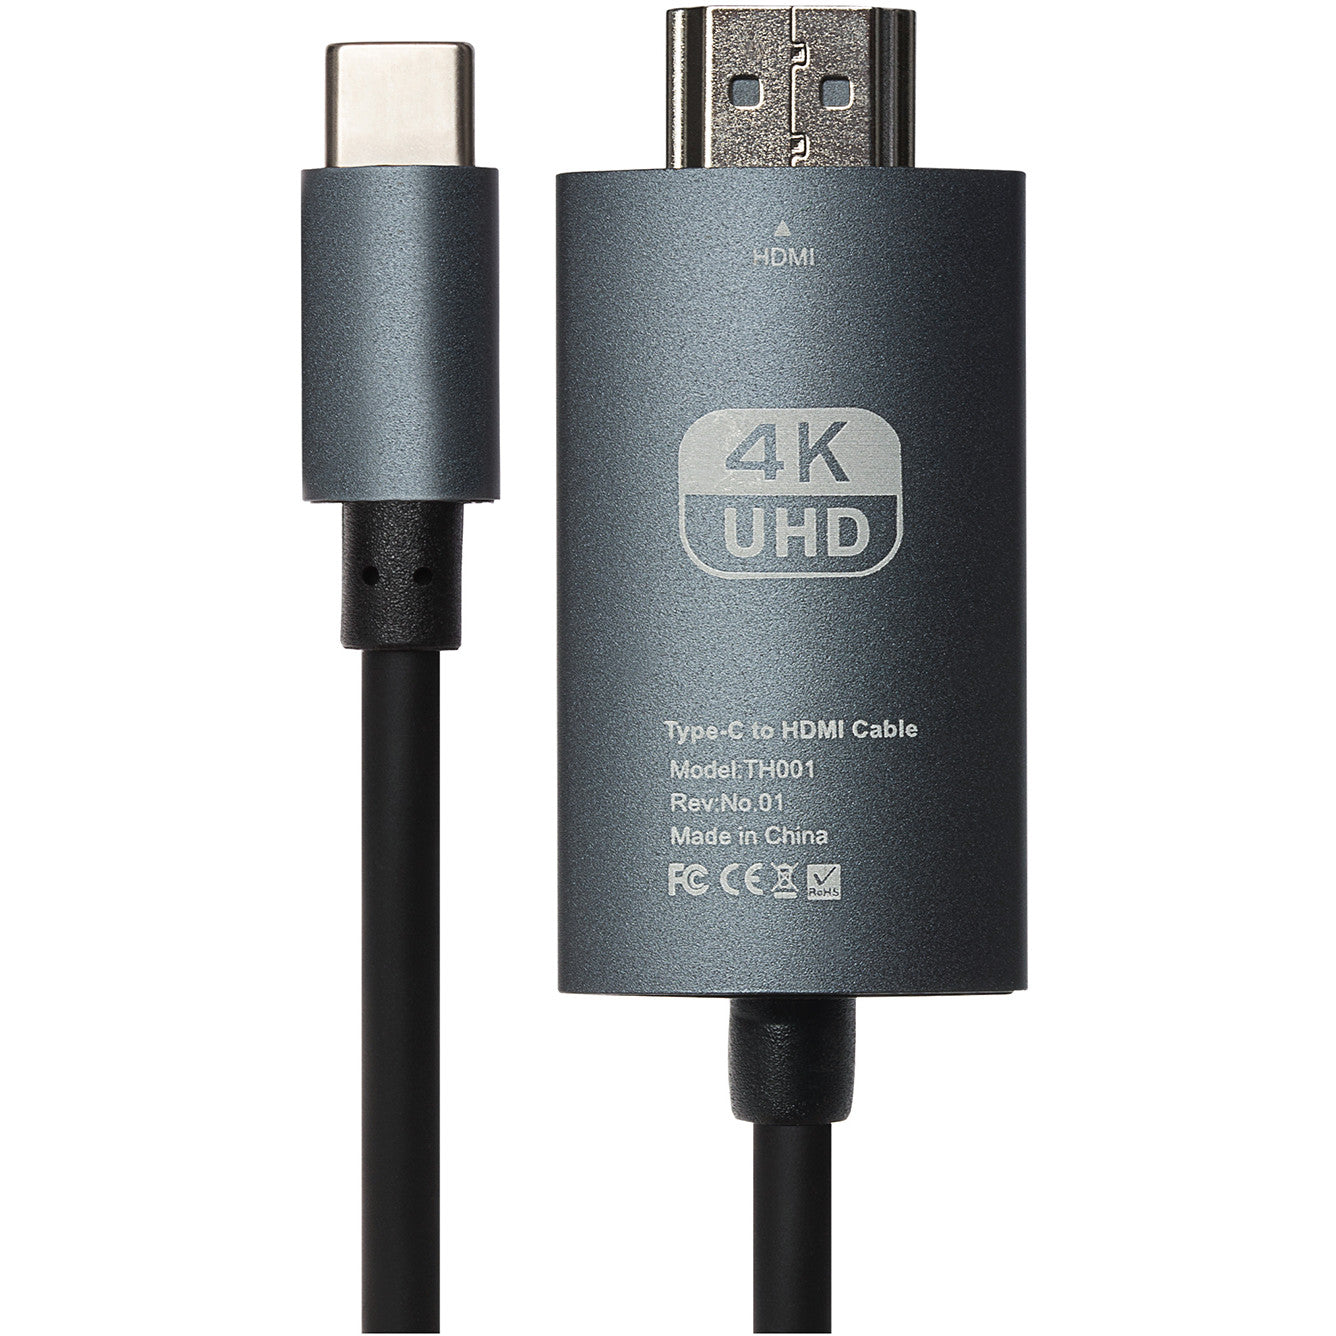 Maplin USB-C to HDMI UHD Cable Supports 4K at 60Hz - Black